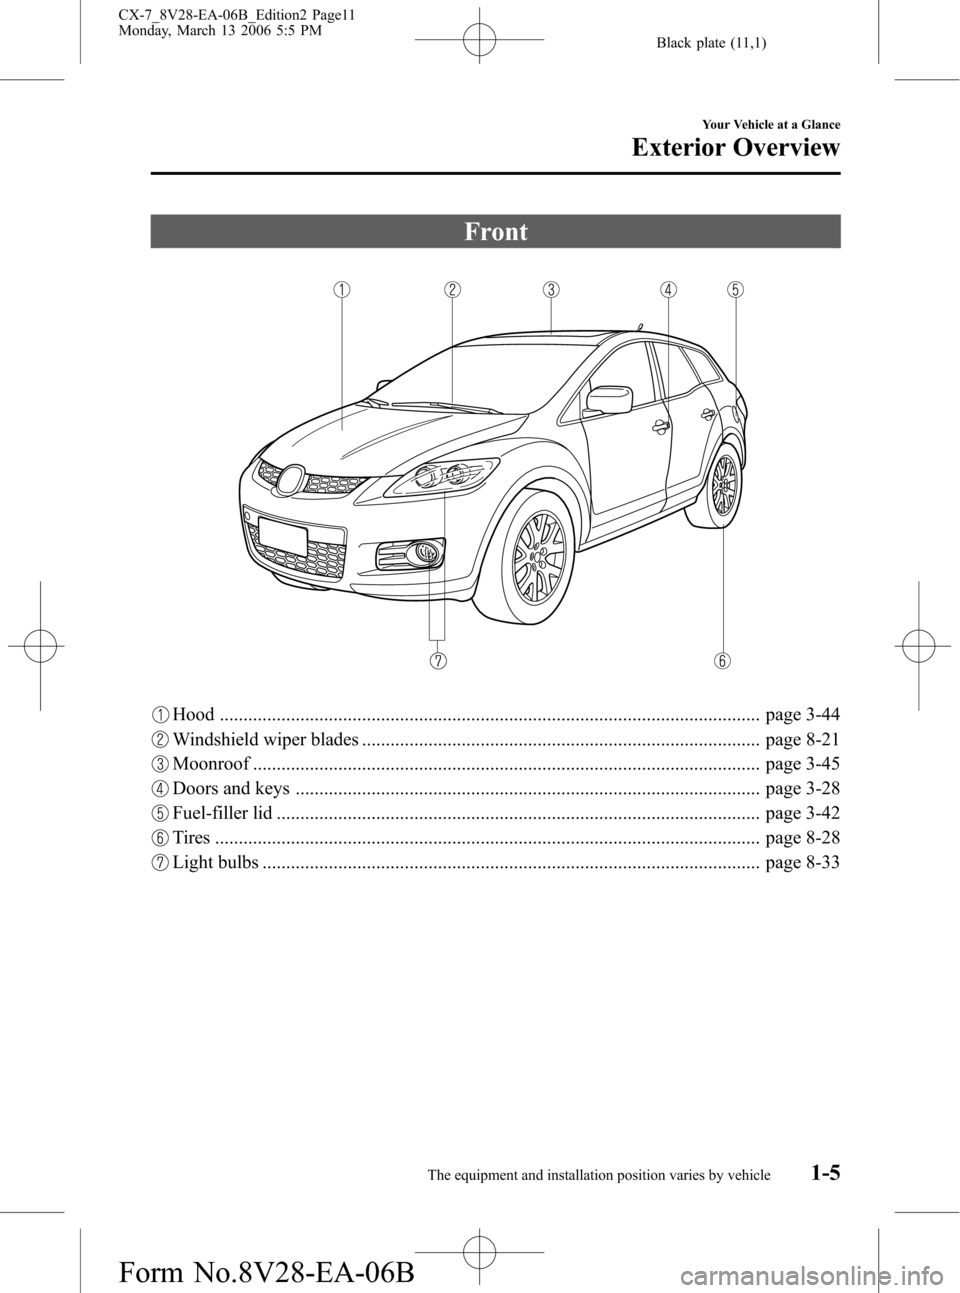 MAZDA MODEL CX-7 2007  Owners Manual (in English) Black plate (11,1)
Front
Hood .................................................................................................................. page 3-44
Windshield wiper blades .....................